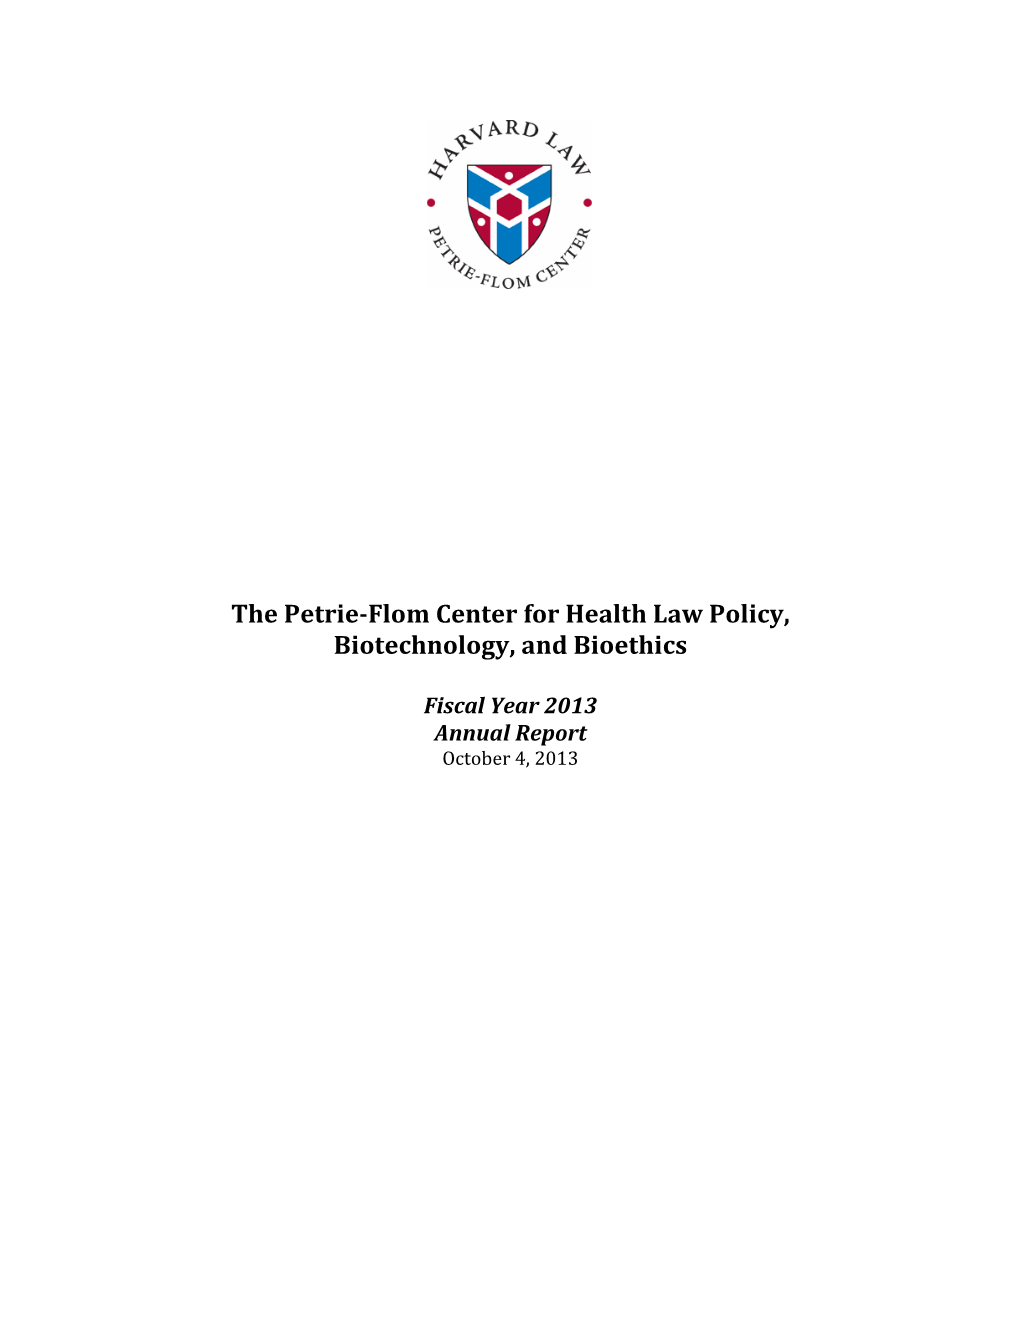 The Petrie-Flom Center for Health Law Policy, Biotechnology, and Bioethics